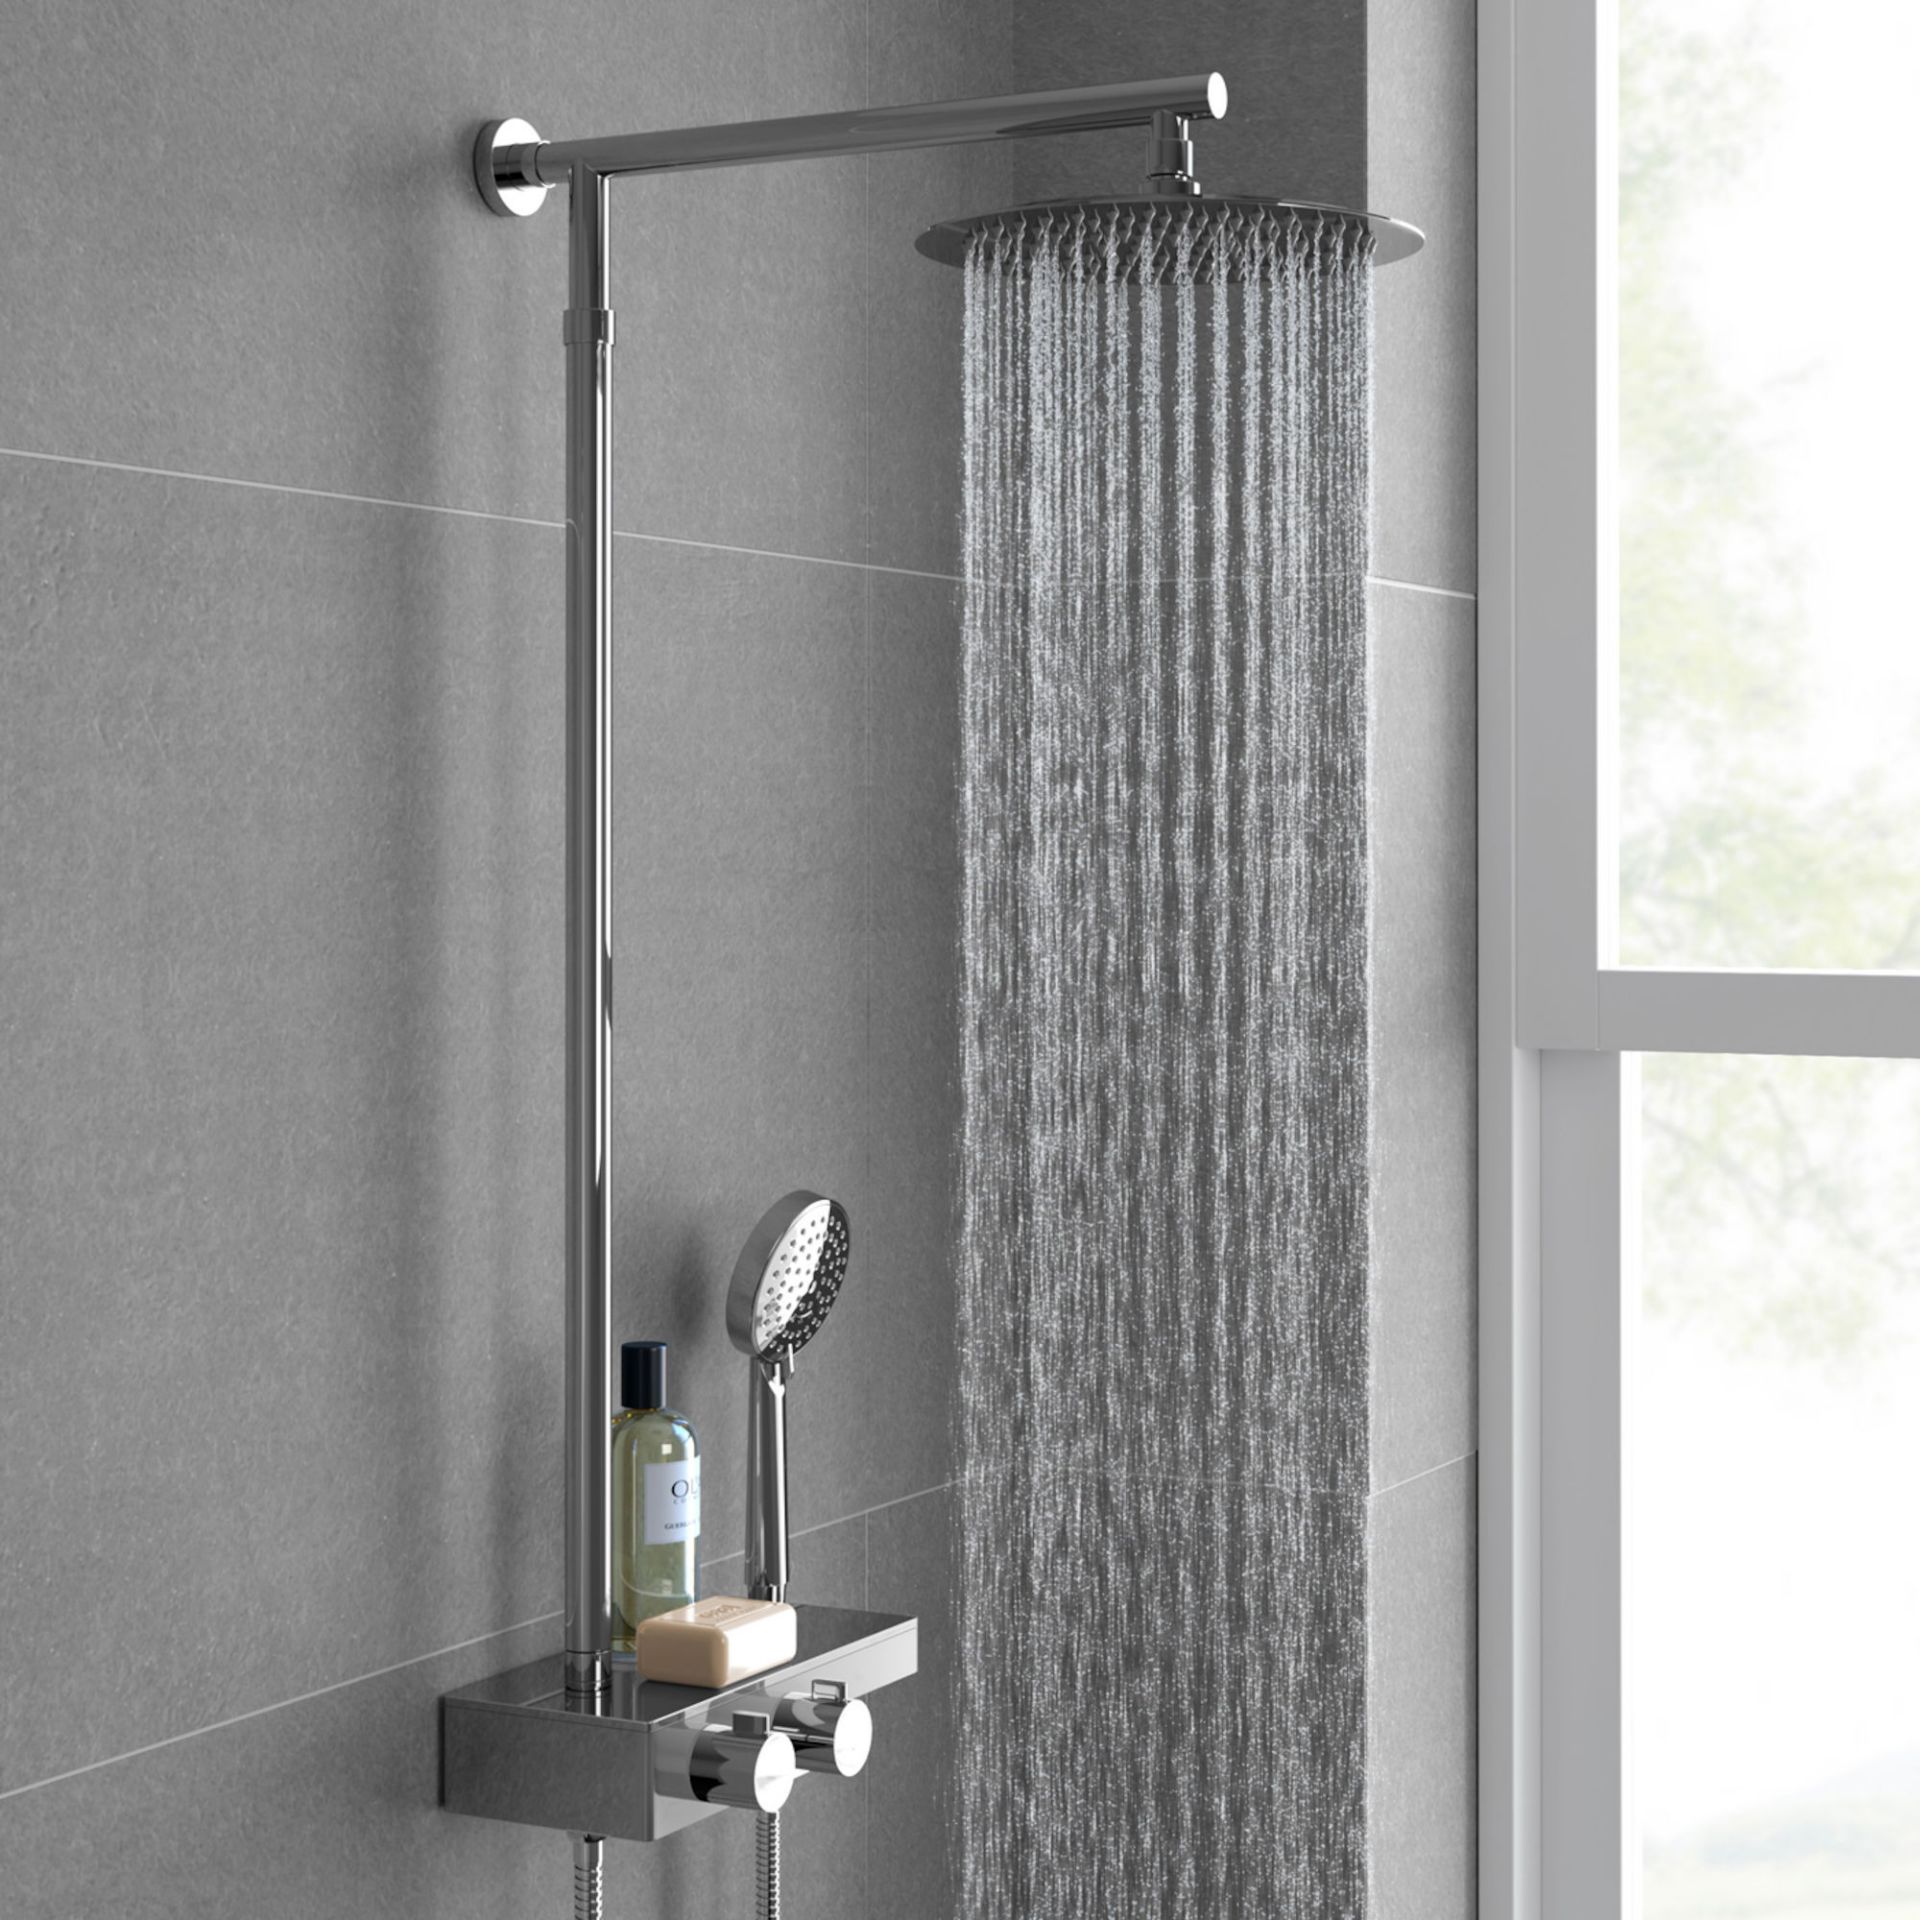 (UK264) Round Exposed Thermostatic Mixer Shower Kit & Large Head. Cool to touch shower for